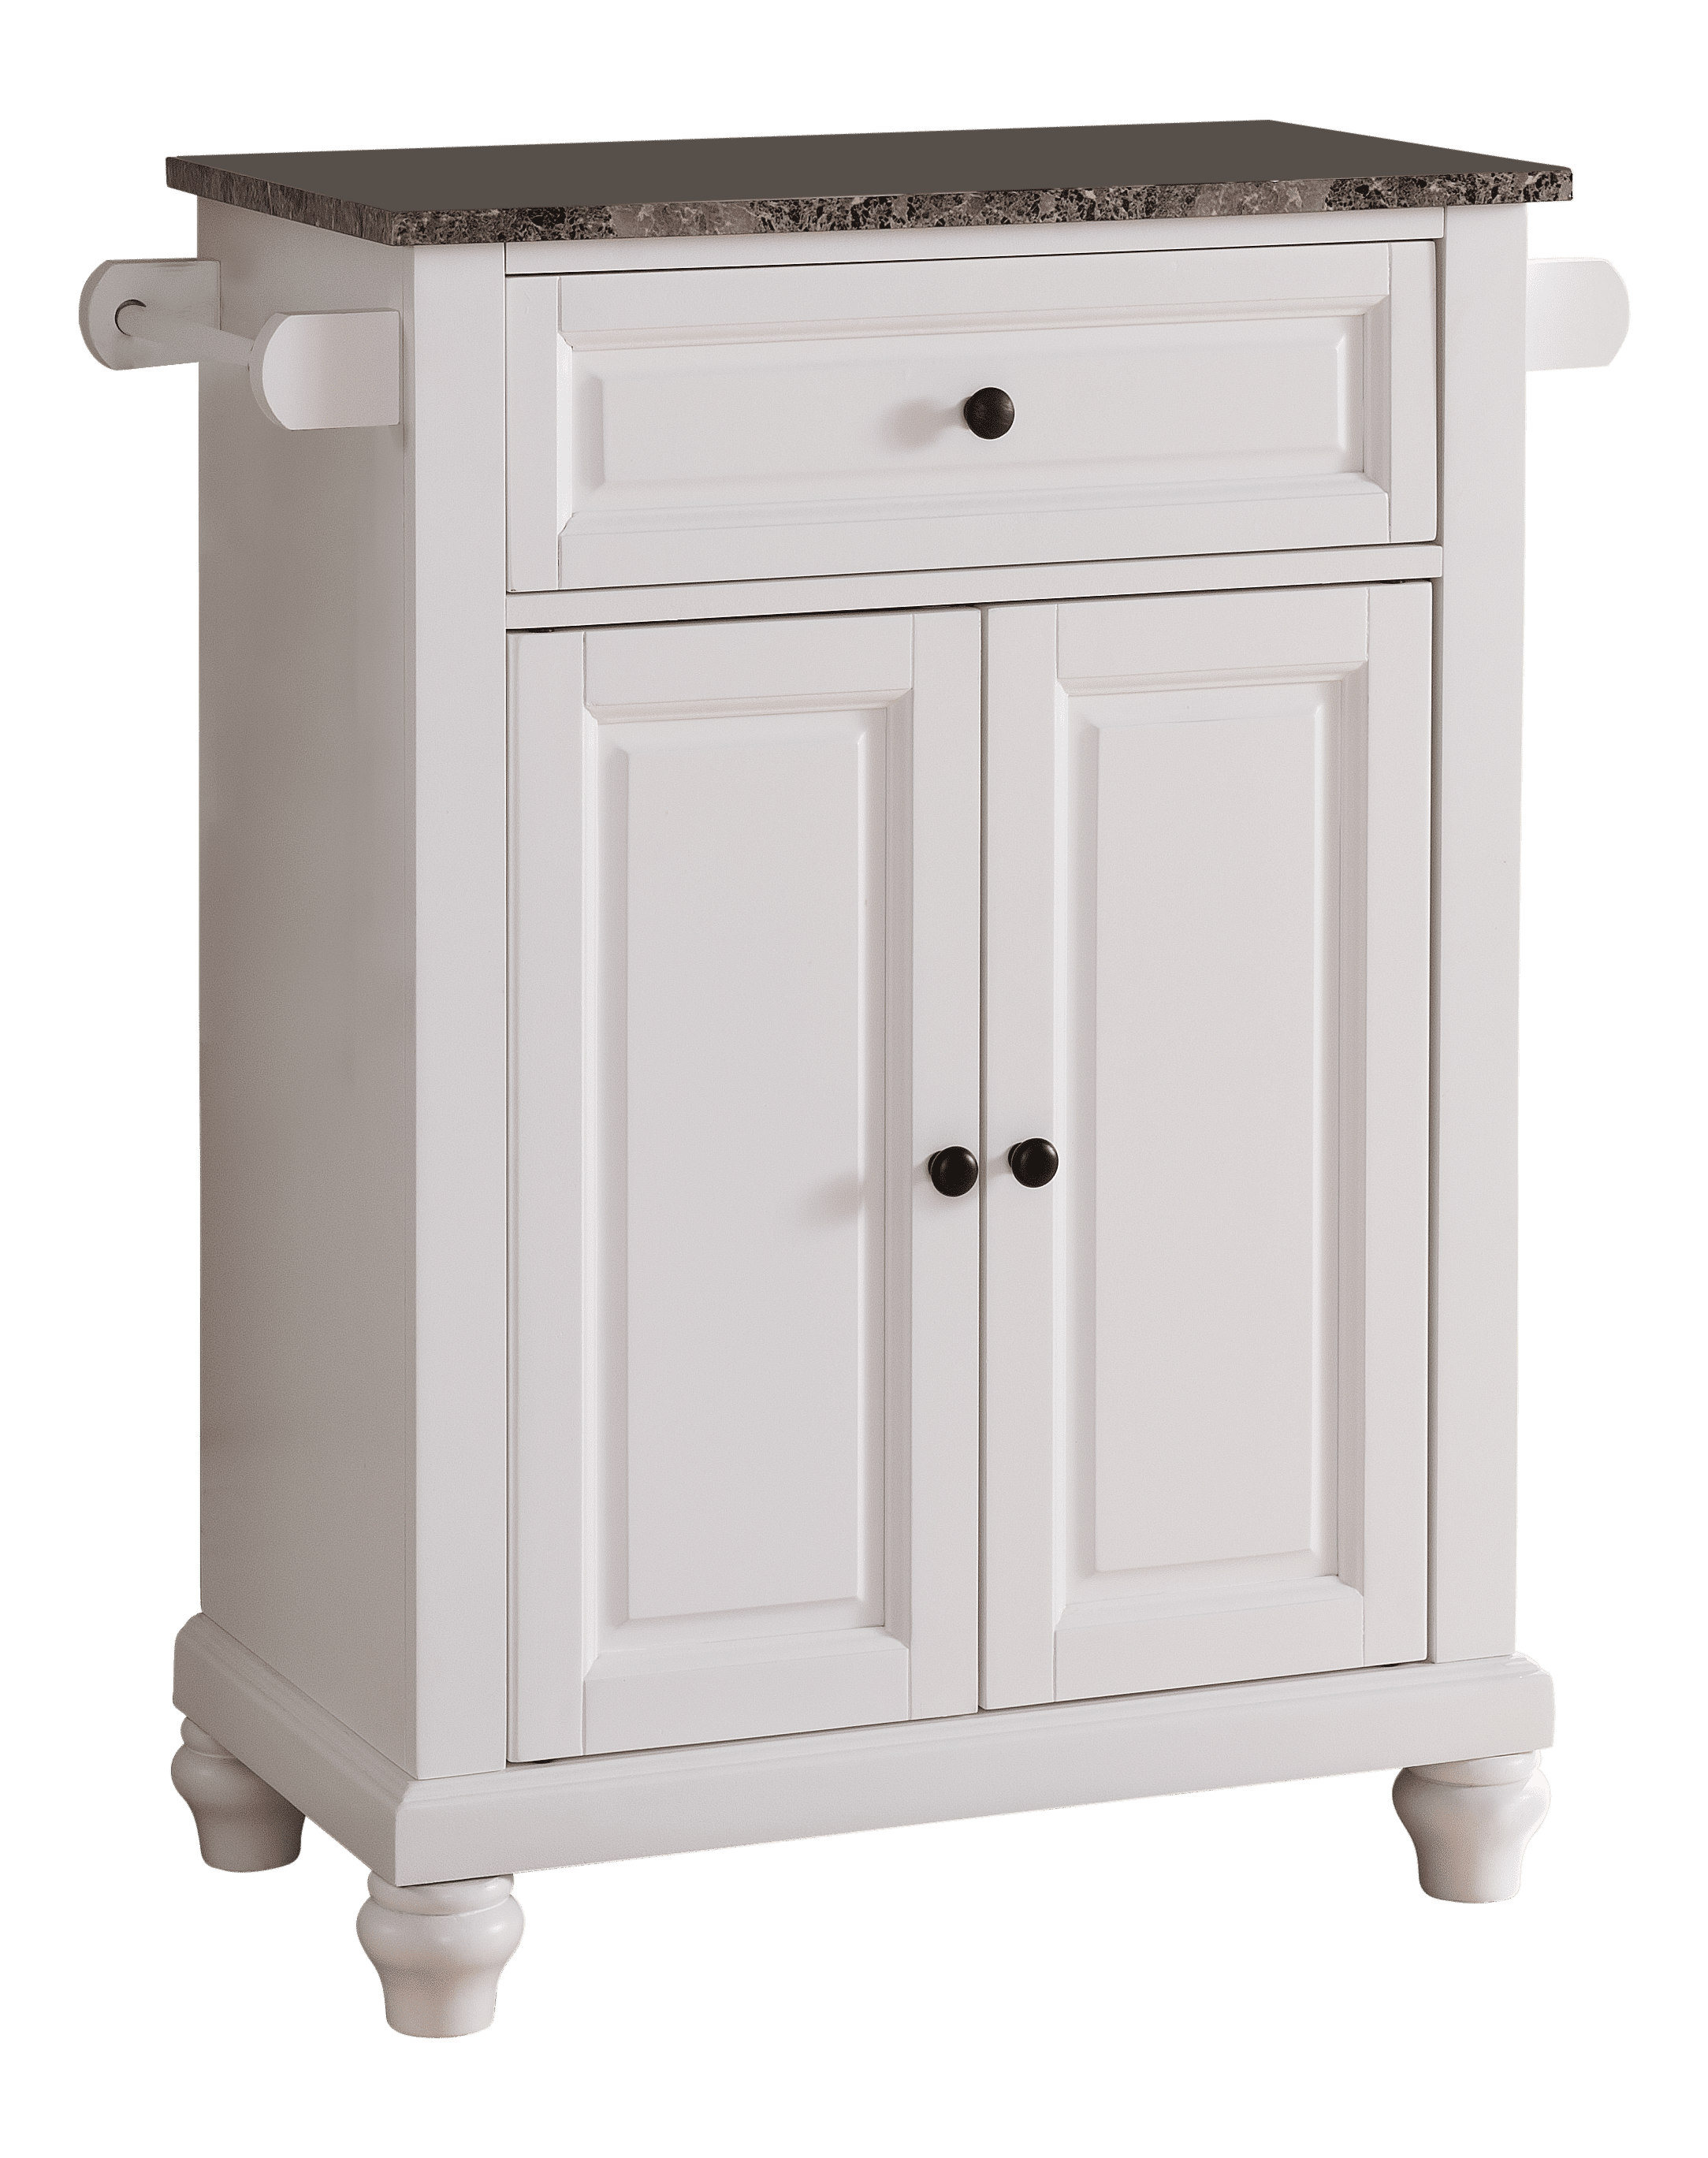 Ian Kitchen Island Storage Cabinet， White and Marble Wood， Adjustable Shelf and Towel Bars， Contemporary